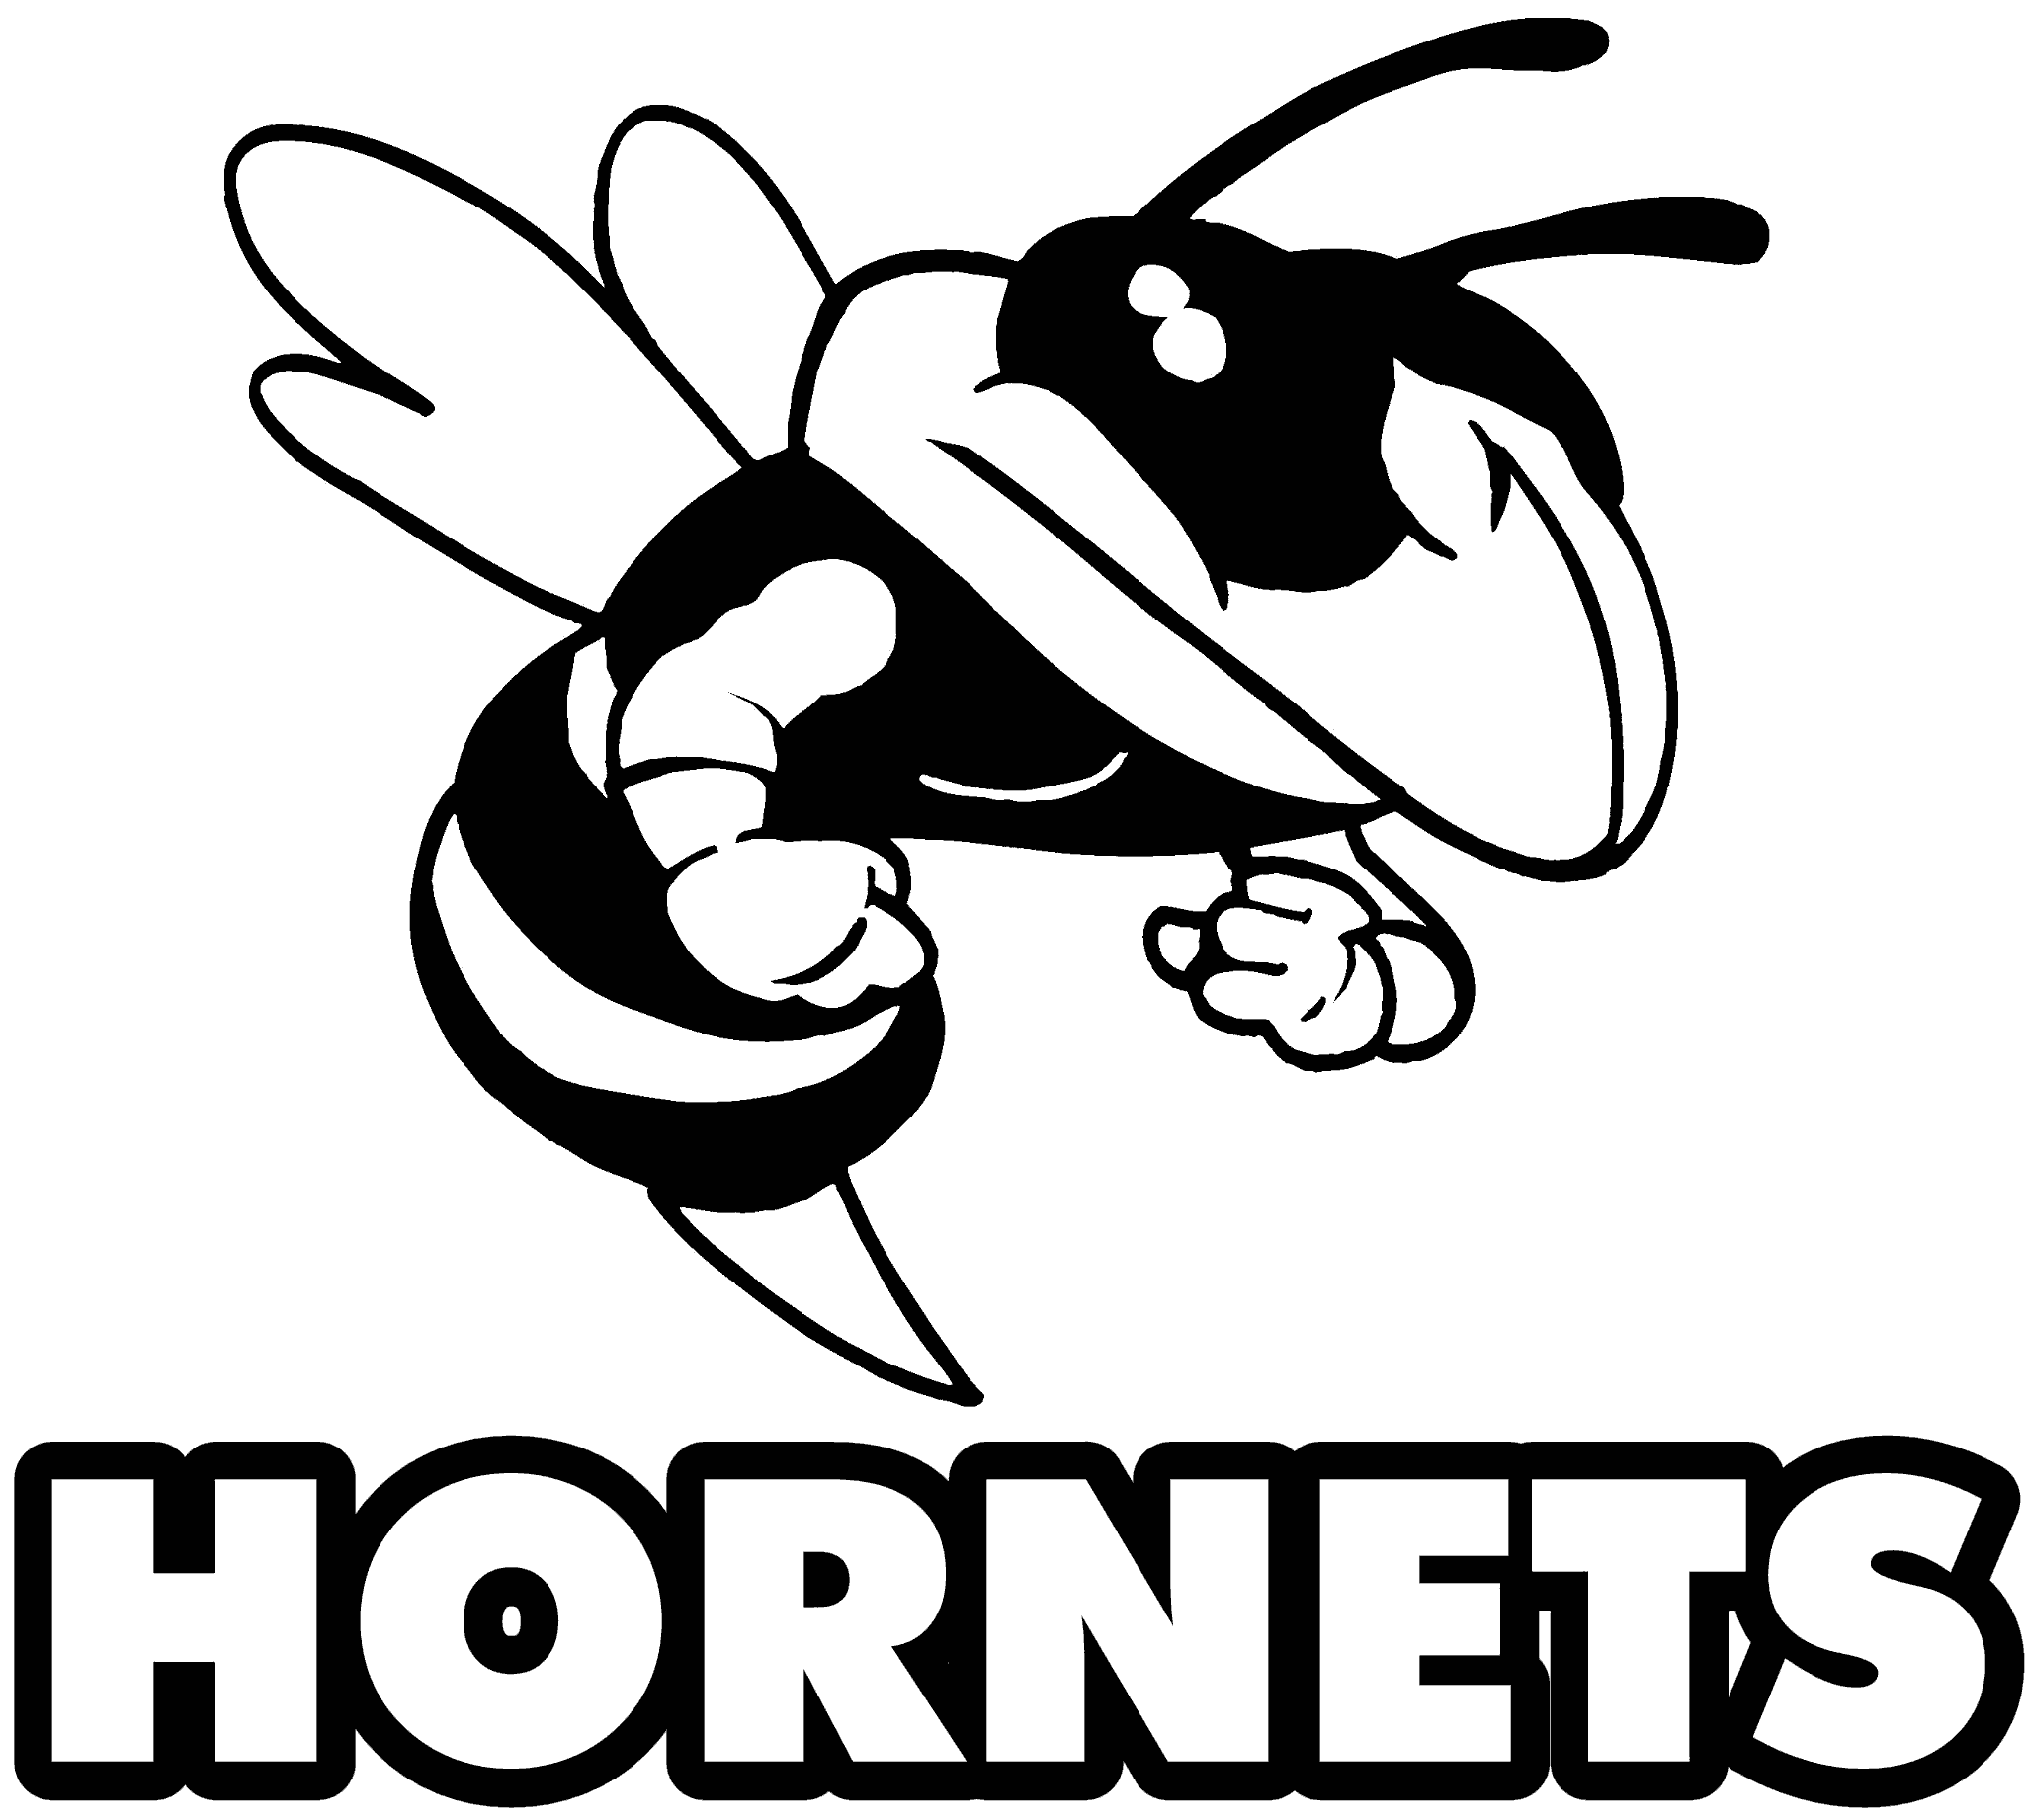 Hornet clipart free images 3